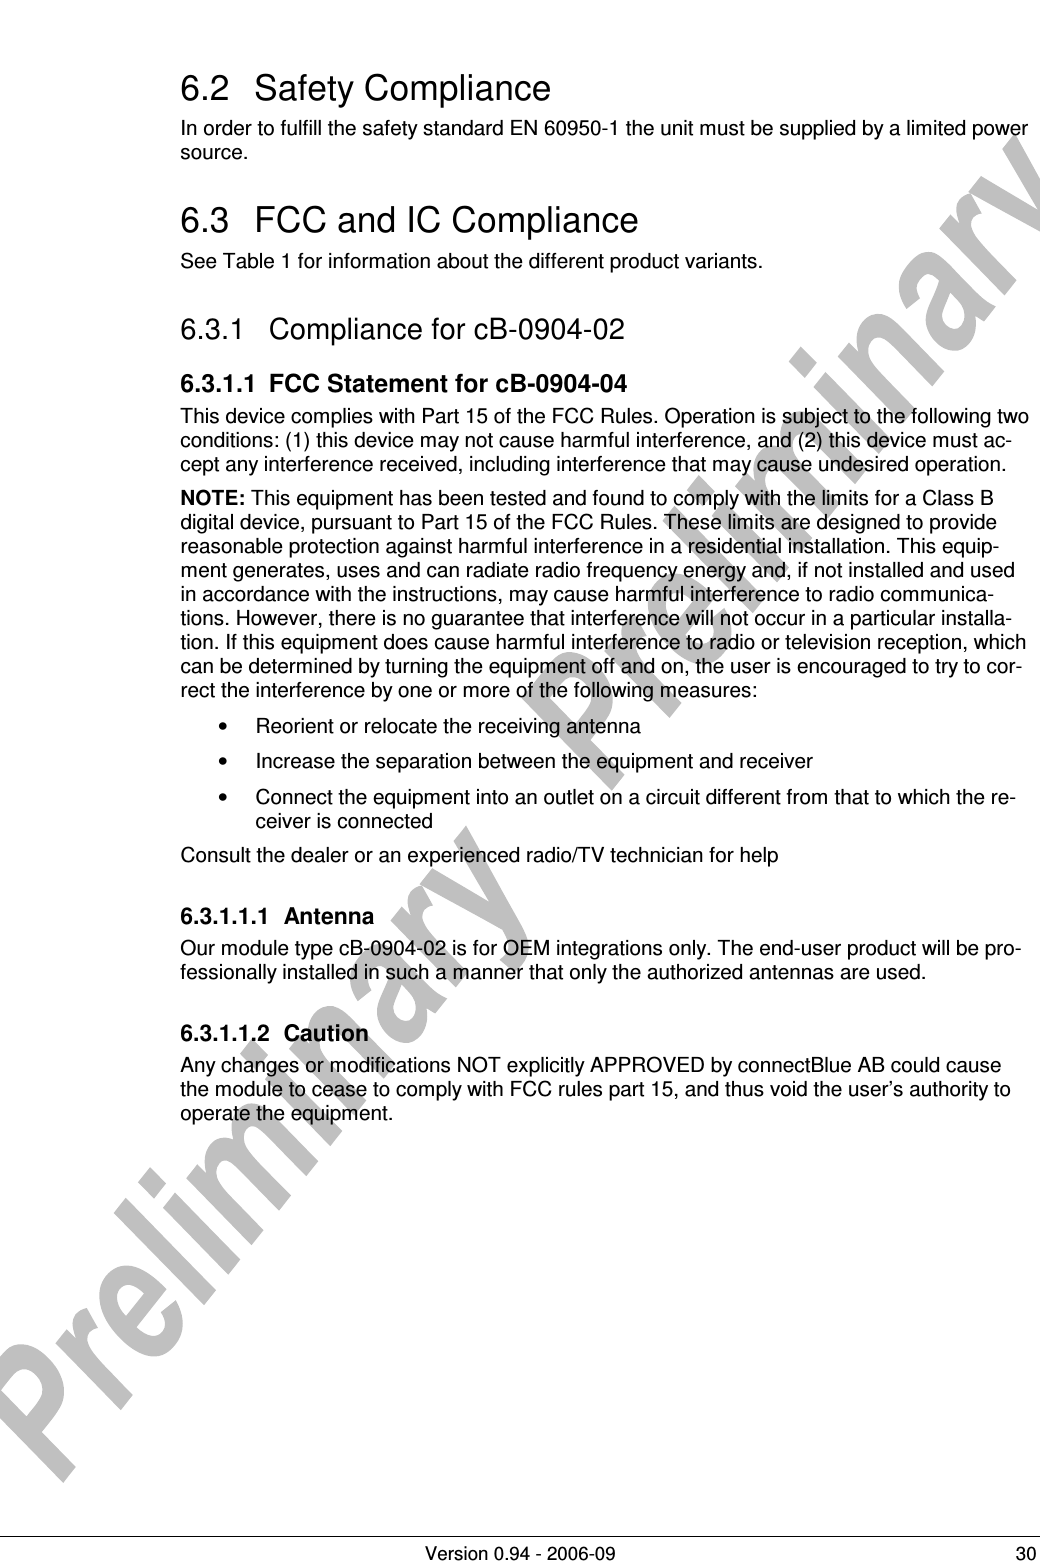          Version 0.94 - 2006-09  30 6.2  Safety Compliance In order to fulfill the safety standard EN 60950-1 the unit must be supplied by a limited power source. 6.3  FCC and IC Compliance See Table 1 for information about the different product variants. 6.3.1  Compliance for cB-0904-02 6.3.1.1  FCC Statement for cB-0904-04 This device complies with Part 15 of the FCC Rules. Operation is subject to the following two conditions: (1) this device may not cause harmful interference, and (2) this device must ac-cept any interference received, including interference that may cause undesired operation. NOTE: This equipment has been tested and found to comply with the limits for a Class B digital device, pursuant to Part 15 of the FCC Rules. These limits are designed to provide reasonable protection against harmful interference in a residential installation. This equip-ment generates, uses and can radiate radio frequency energy and, if not installed and used in accordance with the instructions, may cause harmful interference to radio communica-tions. However, there is no guarantee that interference will not occur in a particular installa-tion. If this equipment does cause harmful interference to radio or television reception, which can be determined by turning the equipment off and on, the user is encouraged to try to cor-rect the interference by one or more of the following measures: •  Reorient or relocate the receiving antenna •  Increase the separation between the equipment and receiver •  Connect the equipment into an outlet on a circuit different from that to which the re-ceiver is connected Consult the dealer or an experienced radio/TV technician for help 6.3.1.1.1  Antenna Our module type cB-0904-02 is for OEM integrations only. The end-user product will be pro-fessionally installed in such a manner that only the authorized antennas are used. 6.3.1.1.2  Caution Any changes or modifications NOT explicitly APPROVED by connectBlue AB could cause the module to cease to comply with FCC rules part 15, and thus void the user’s authority to operate the equipment. 